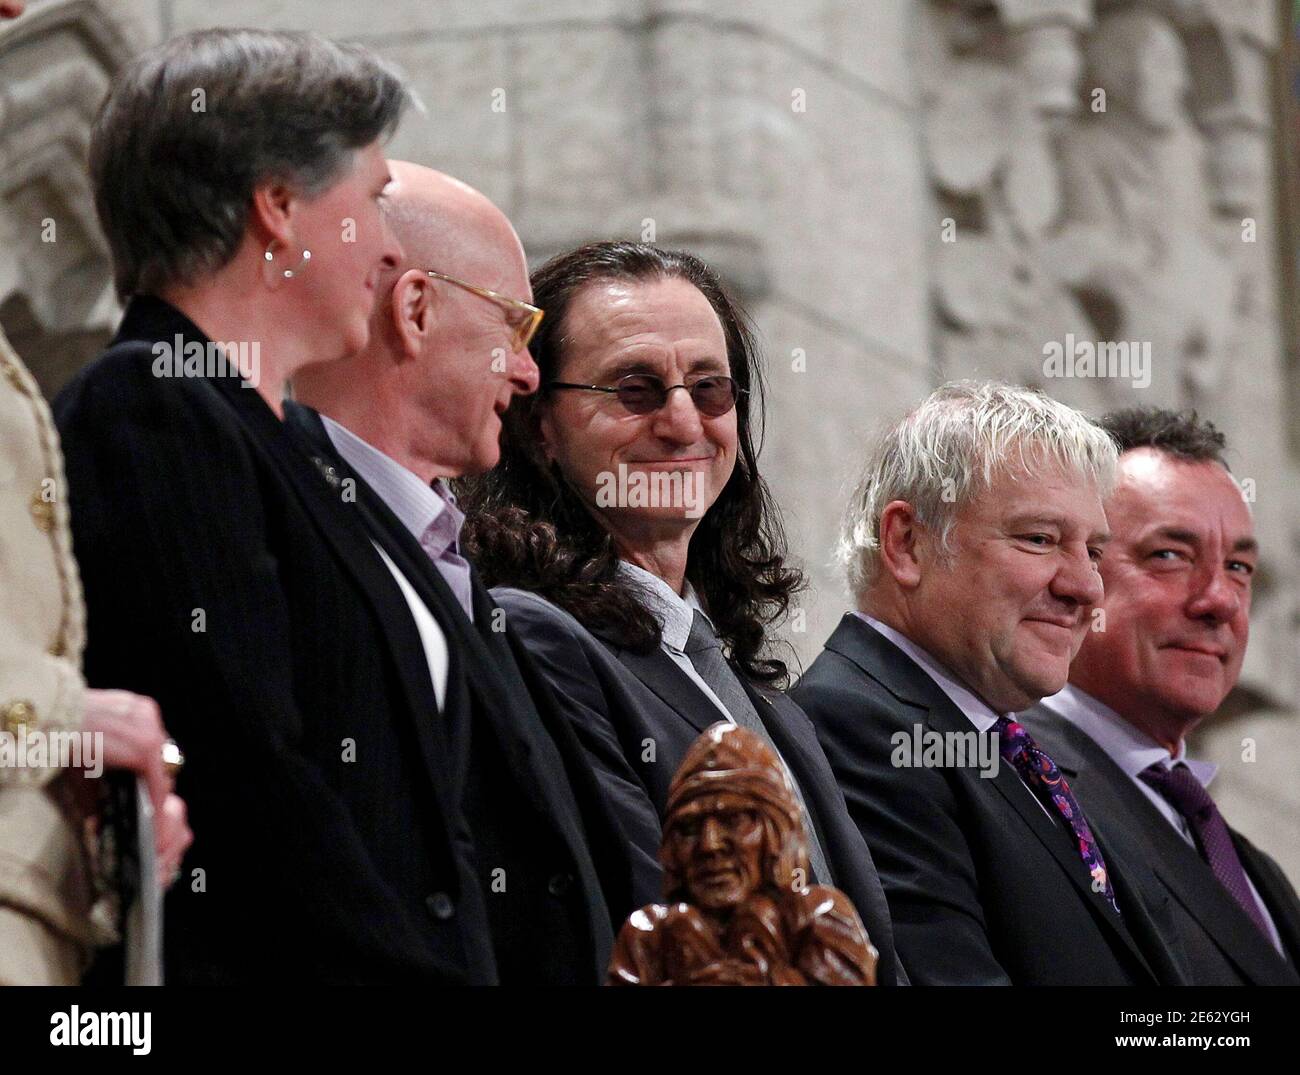 Geddy Lee (C), Alex Lifeson (2nd R) and Neil Peart (R) of the Canadian rock band Rush smile while being recognized along with fellow recipients of the Governor General's Performing Arts Awards in the House of Commons on Parliament Hill in Ottawa May 3, 2012. Also pictured are Janina Fialkowska (L) and Paul-Andre Fortier.       REUTERS/Chris Wattie       (CANADA - Tags: POLITICS ENTERTAINMENT) Stock Photo